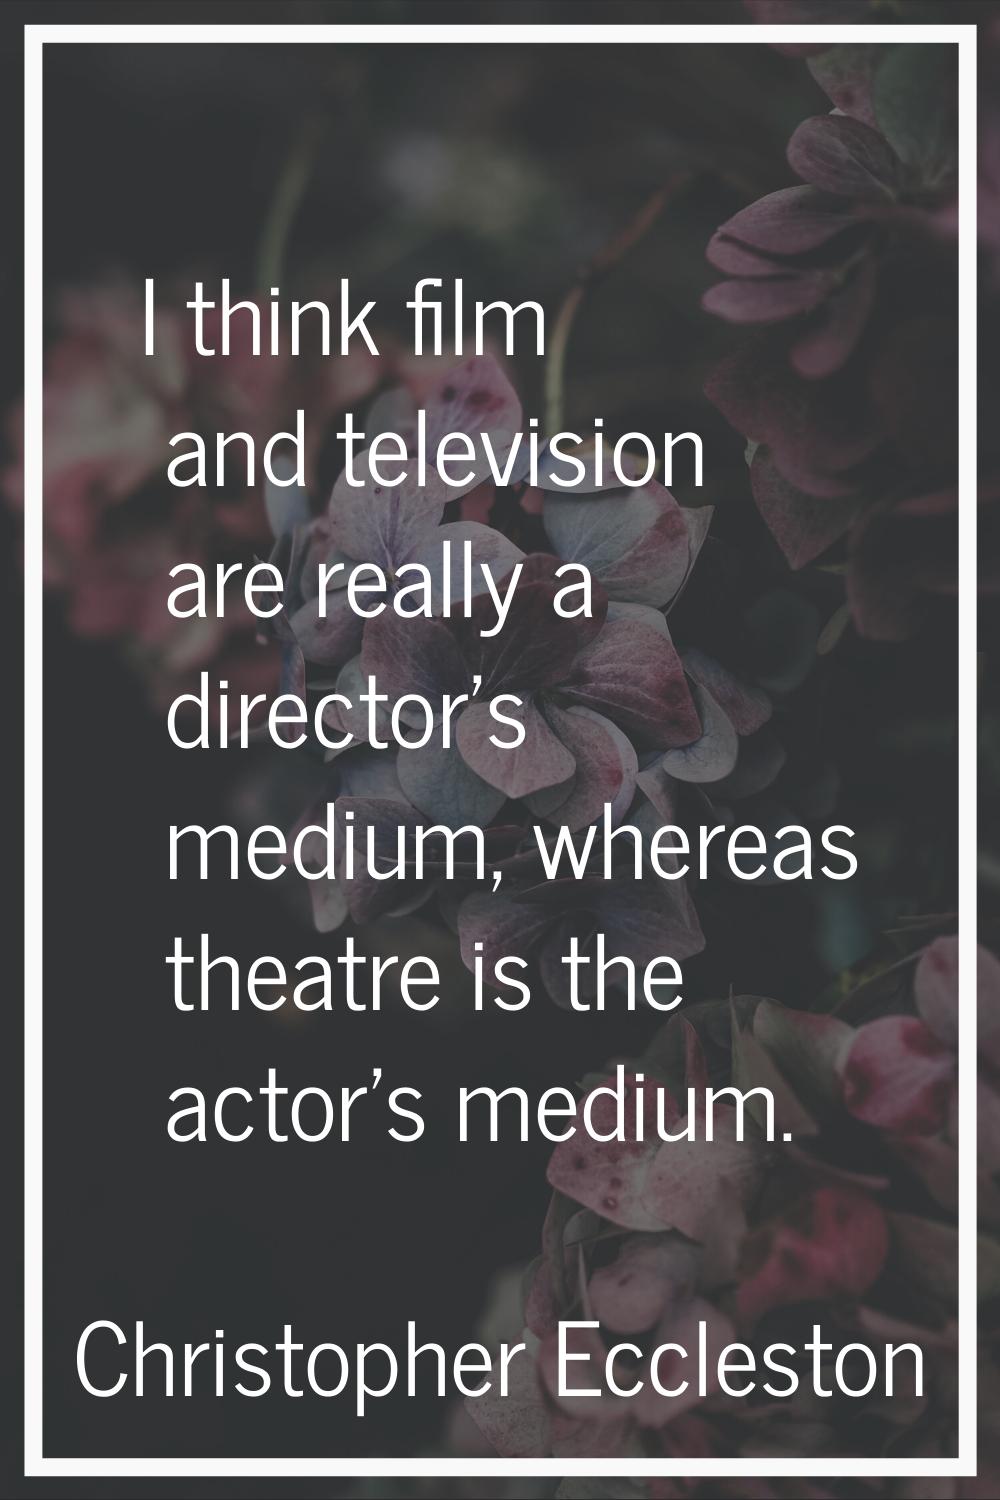 I think film and television are really a director's medium, whereas theatre is the actor's medium.